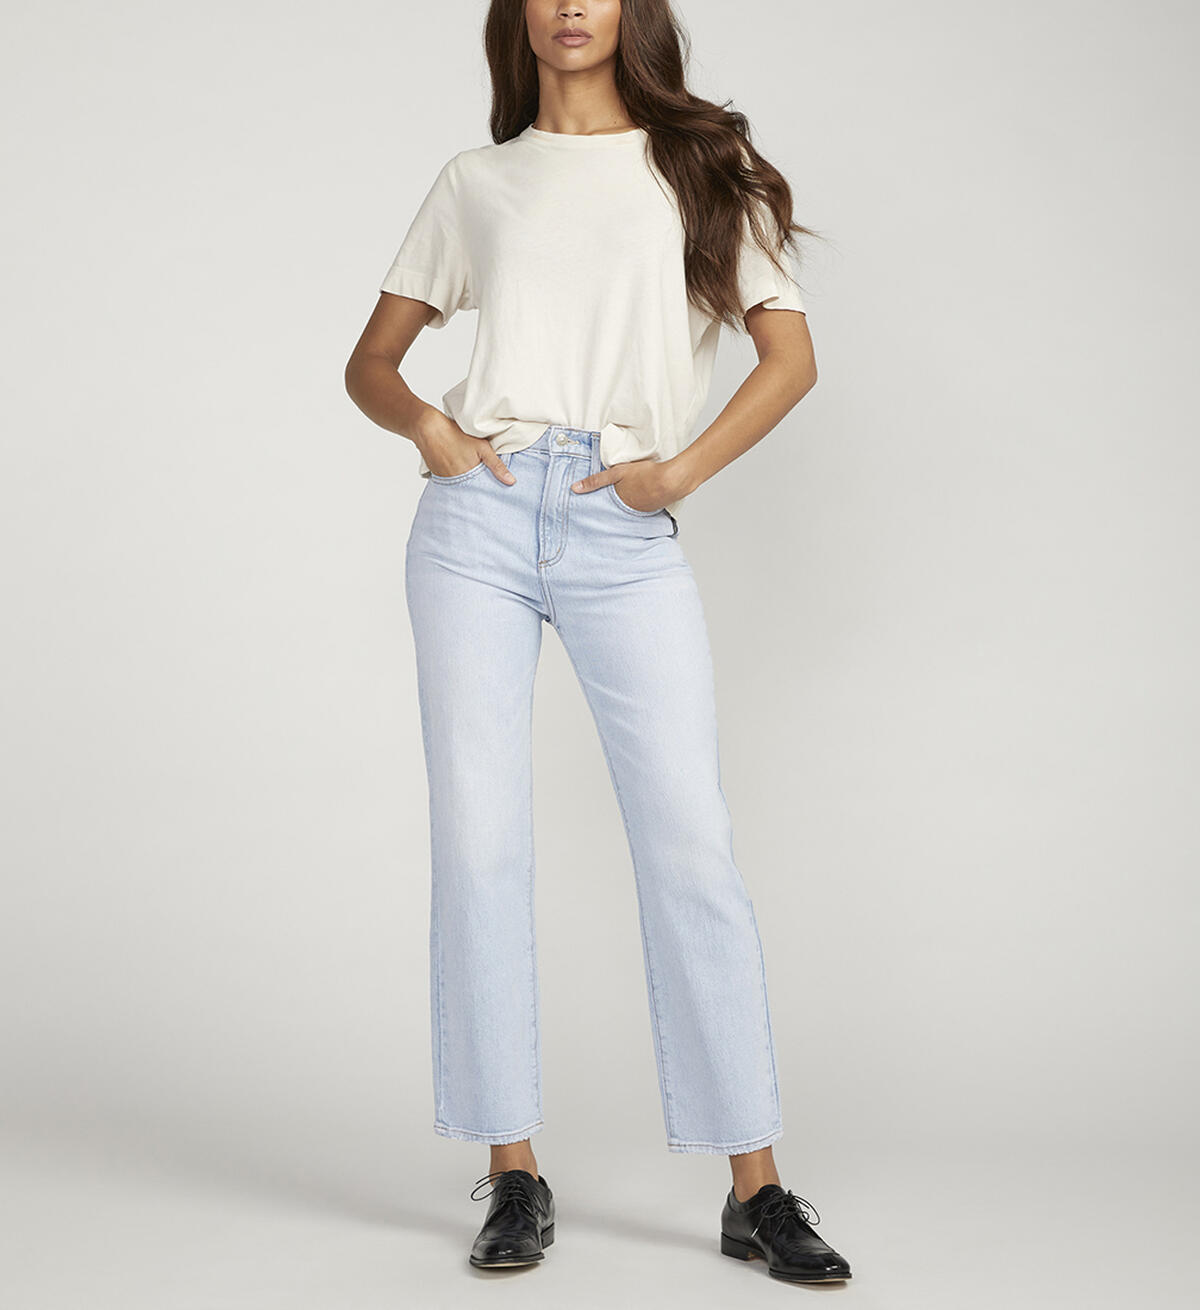 Highly Desirable High Rise Straight Leg Jeans, , hi-res image number 0